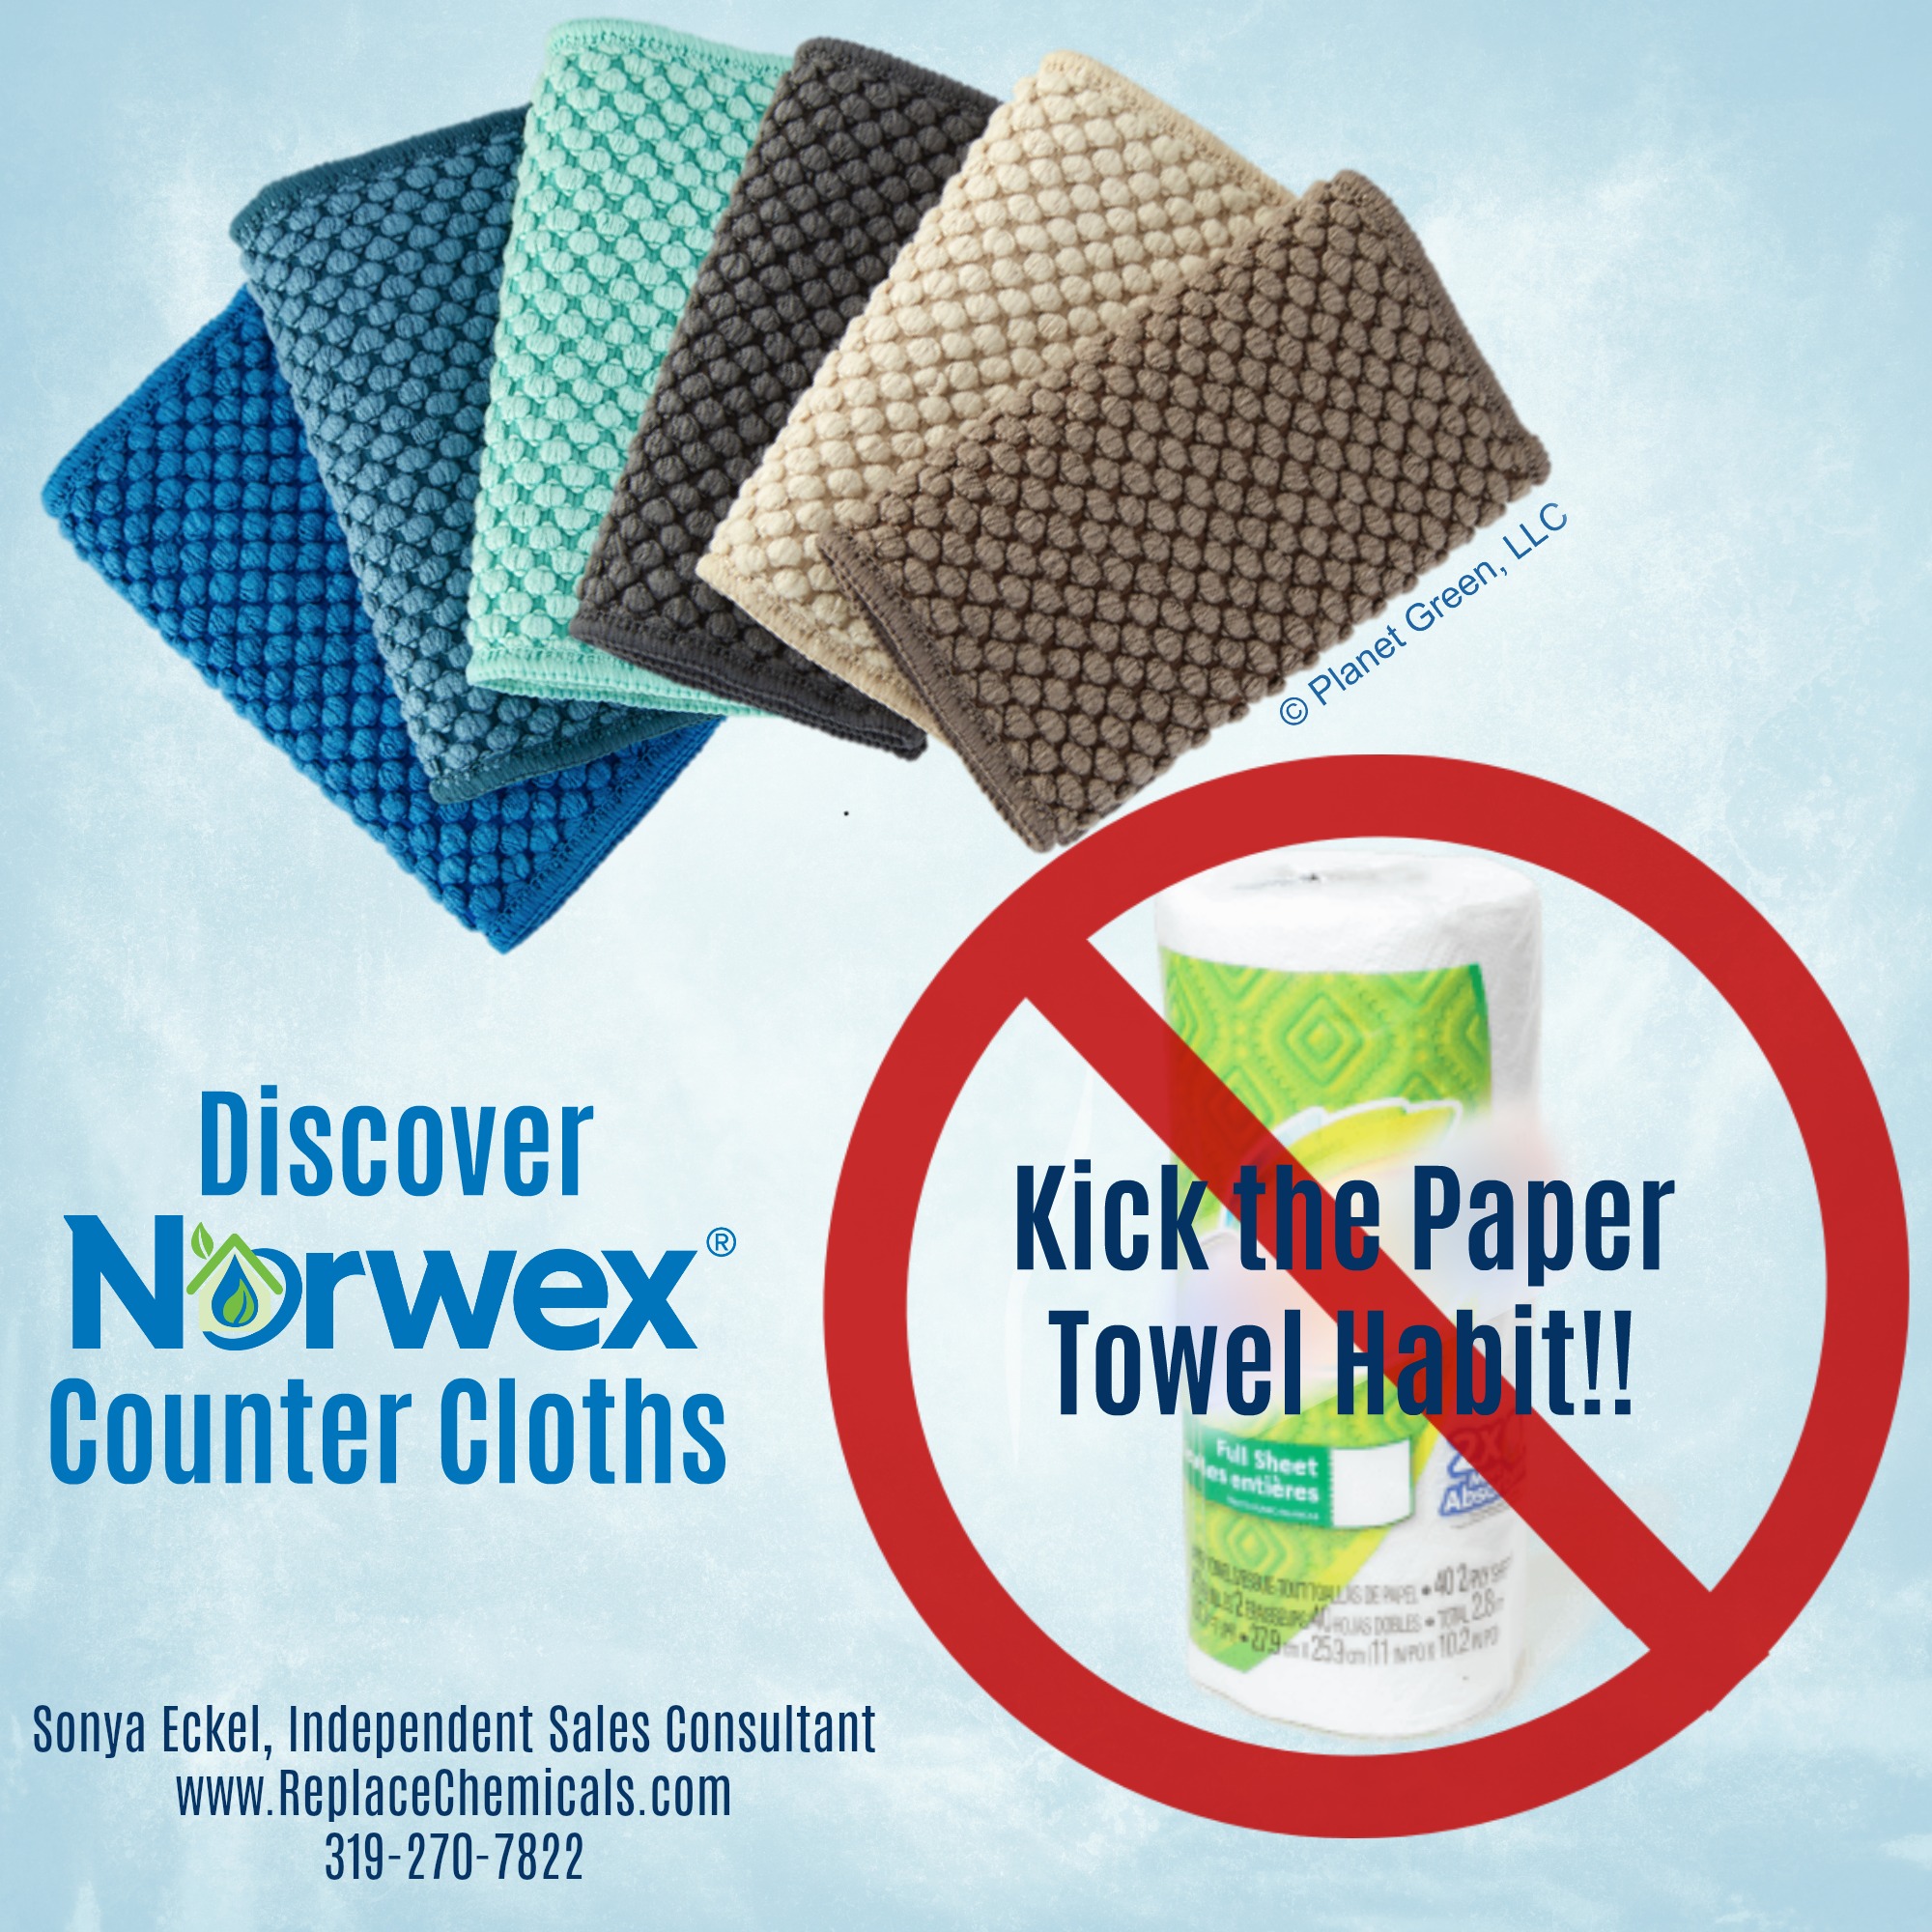 Counter cloth facts!  Norwex, Norwex microfiber, Norwex cleaning